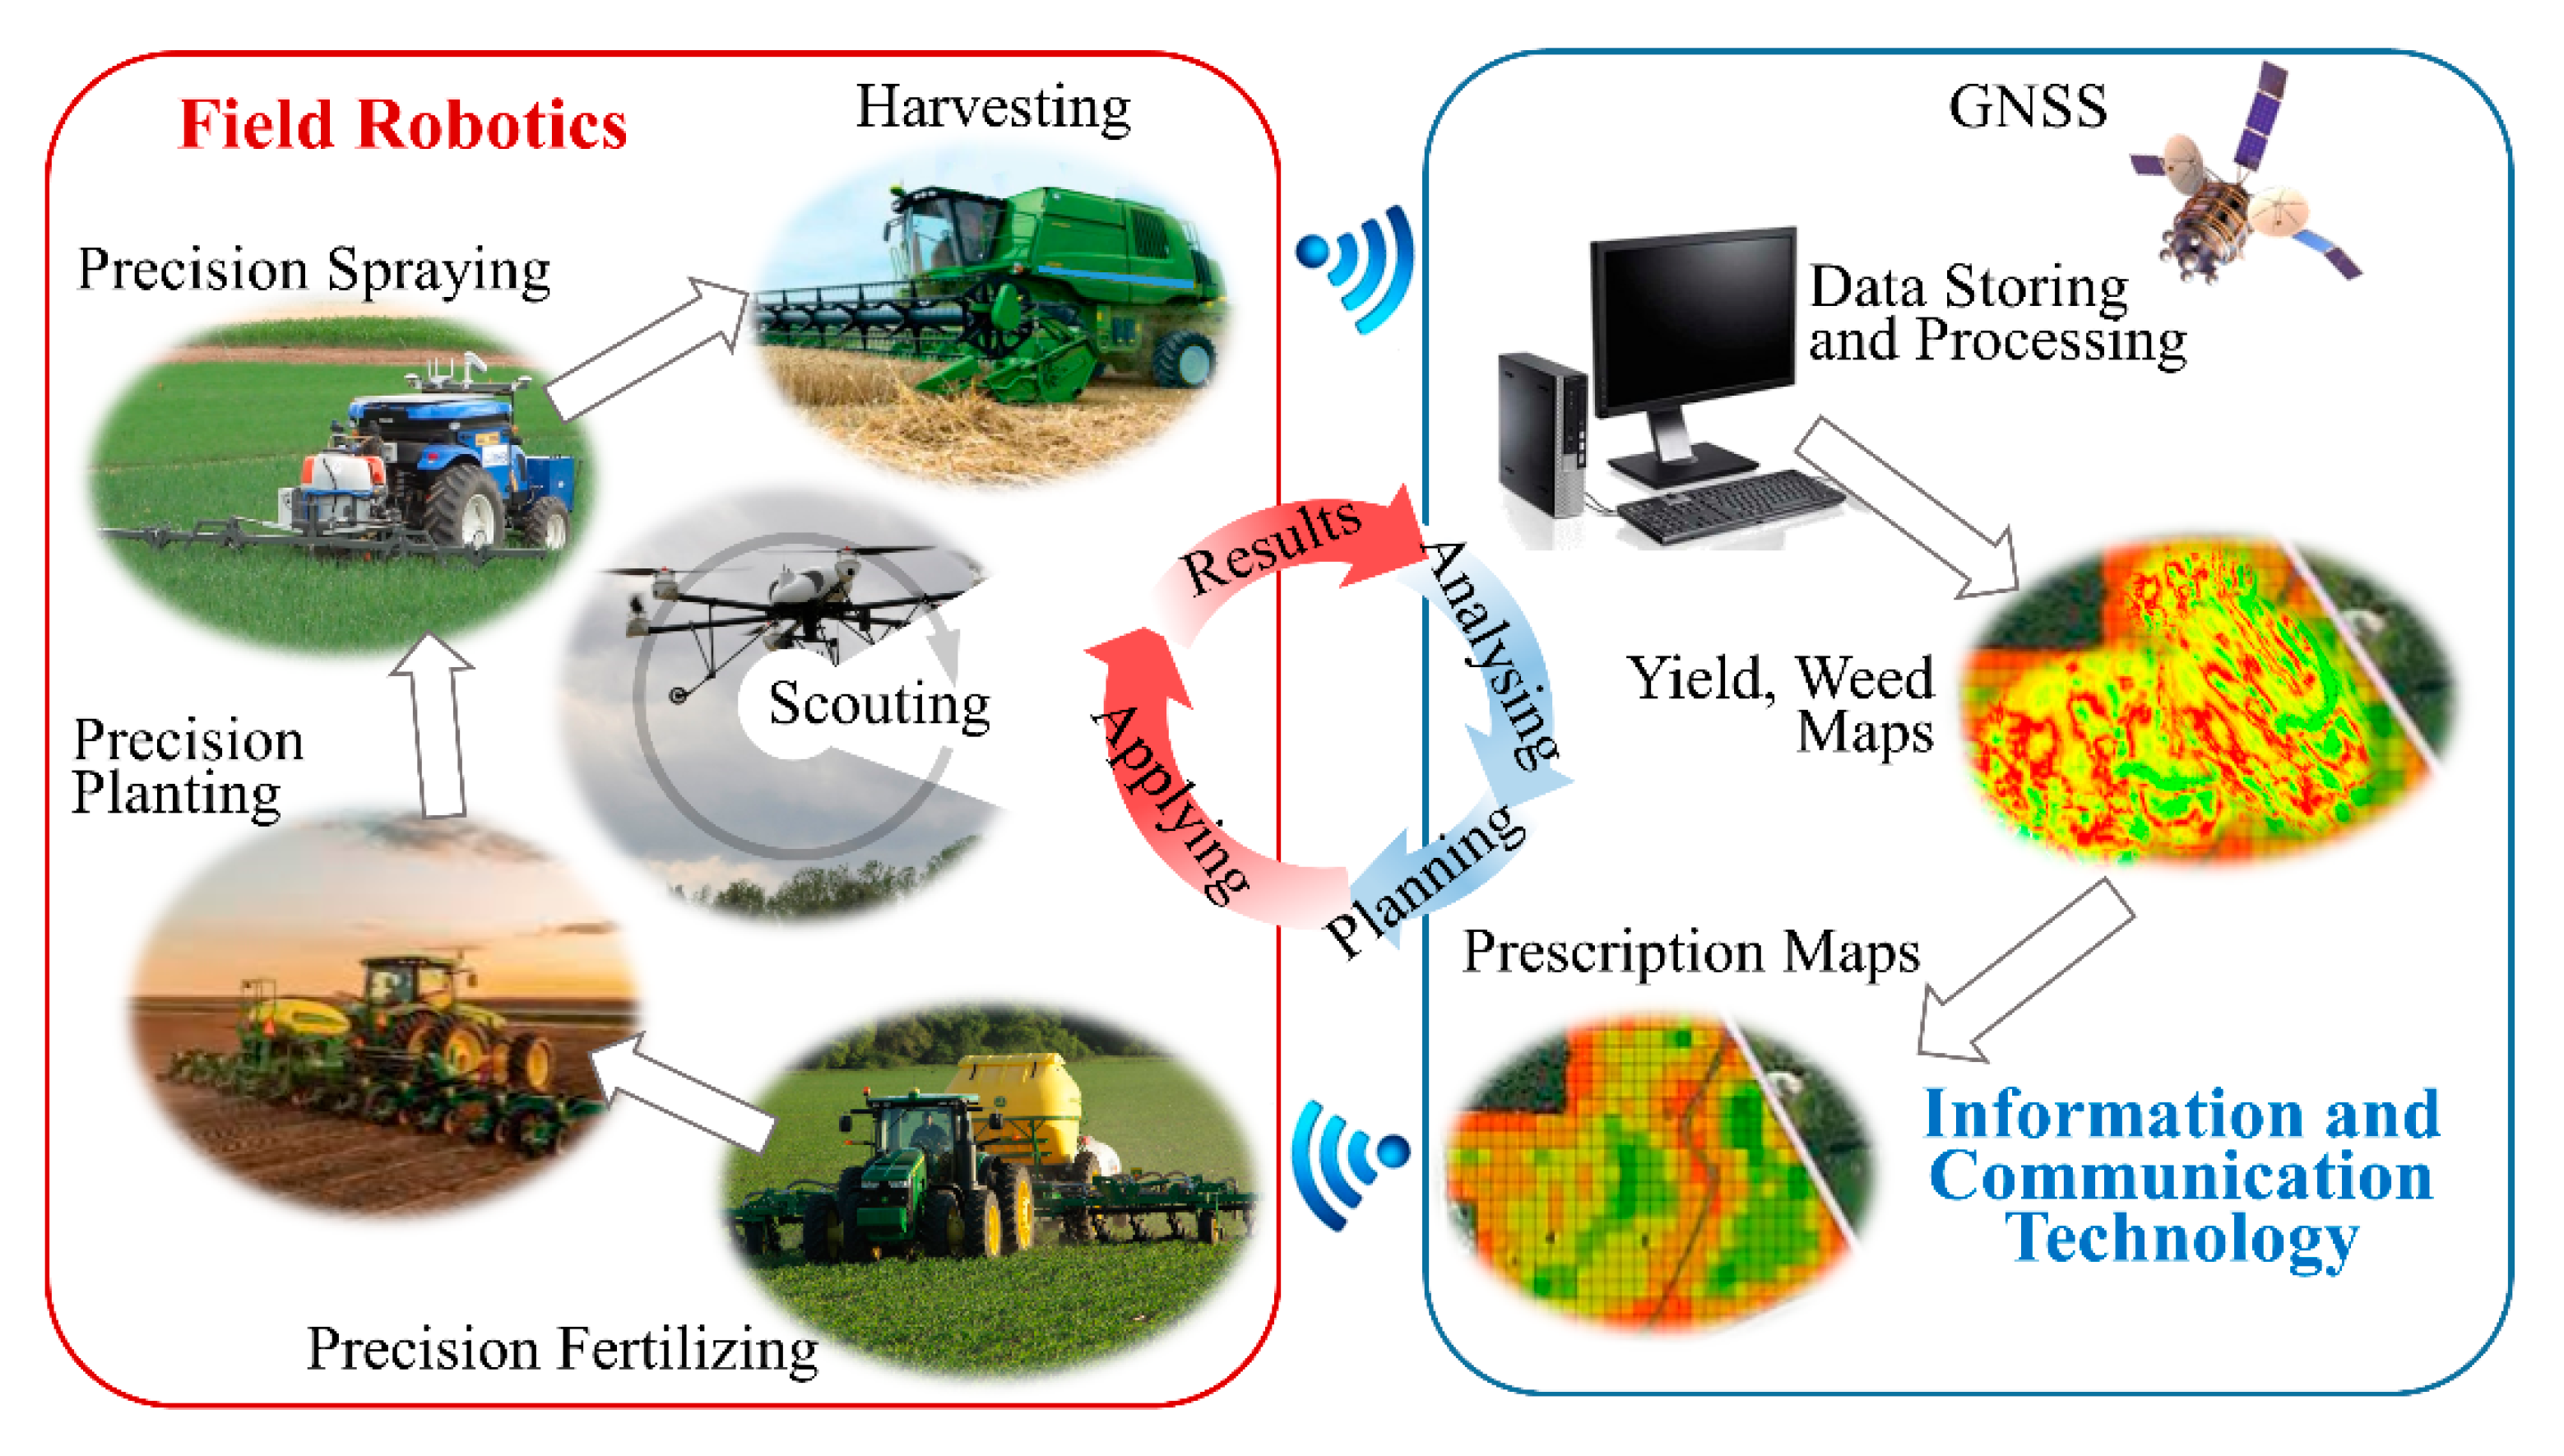 https://www.mdpi.com/agronomy/agronomy-10-01638/article_deploy/html/images/agronomy-10-01638-g001.png